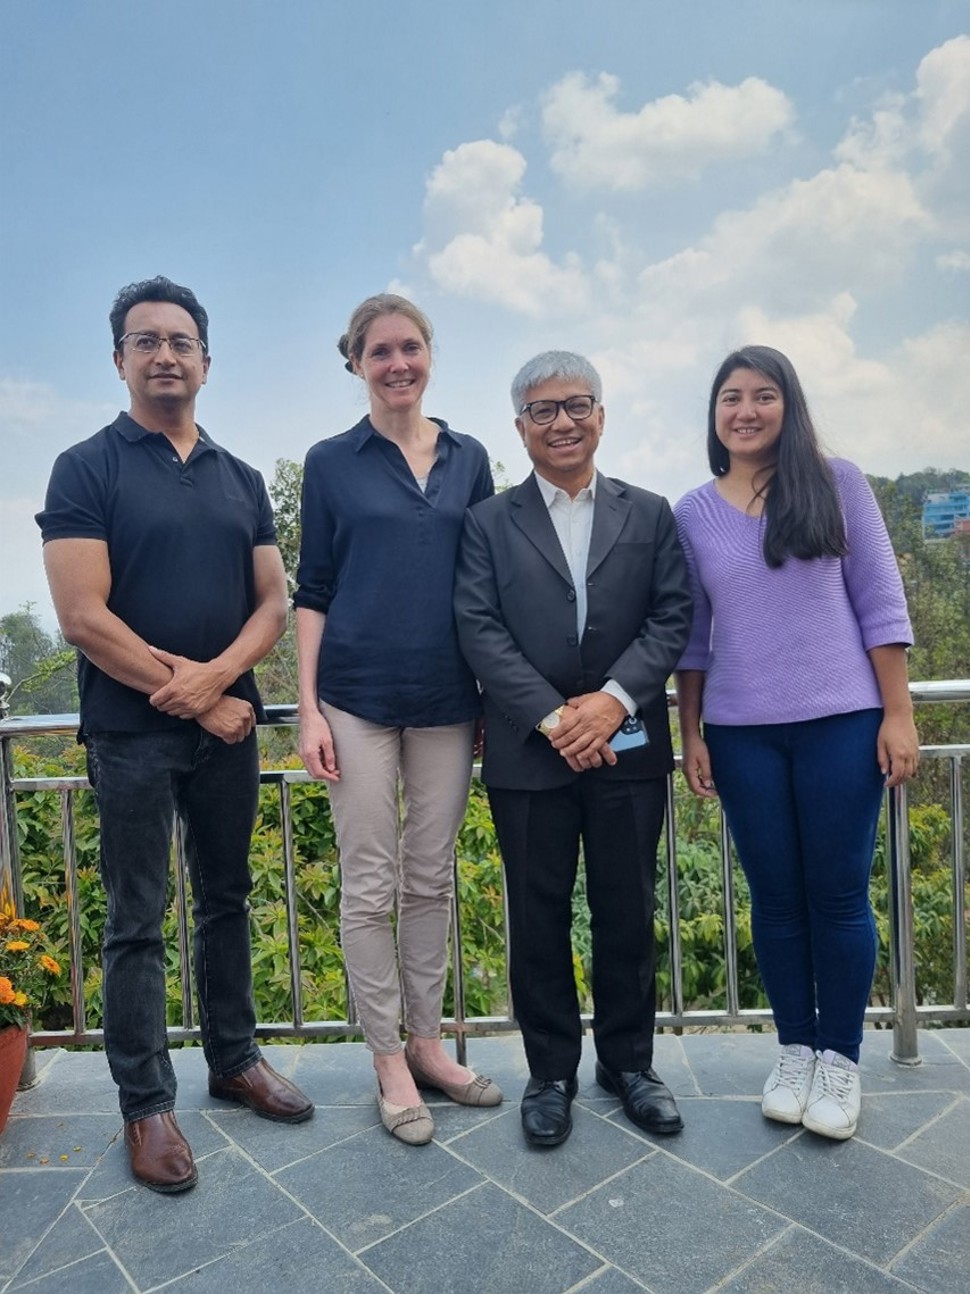 Dean Rajendra Koju, along with Asst. Prof. Biraj Karmacharya and Asst. Prof. Archana Shrestha announcing the selected candidates for the PhD Program in Health Sciences, March 2023. 